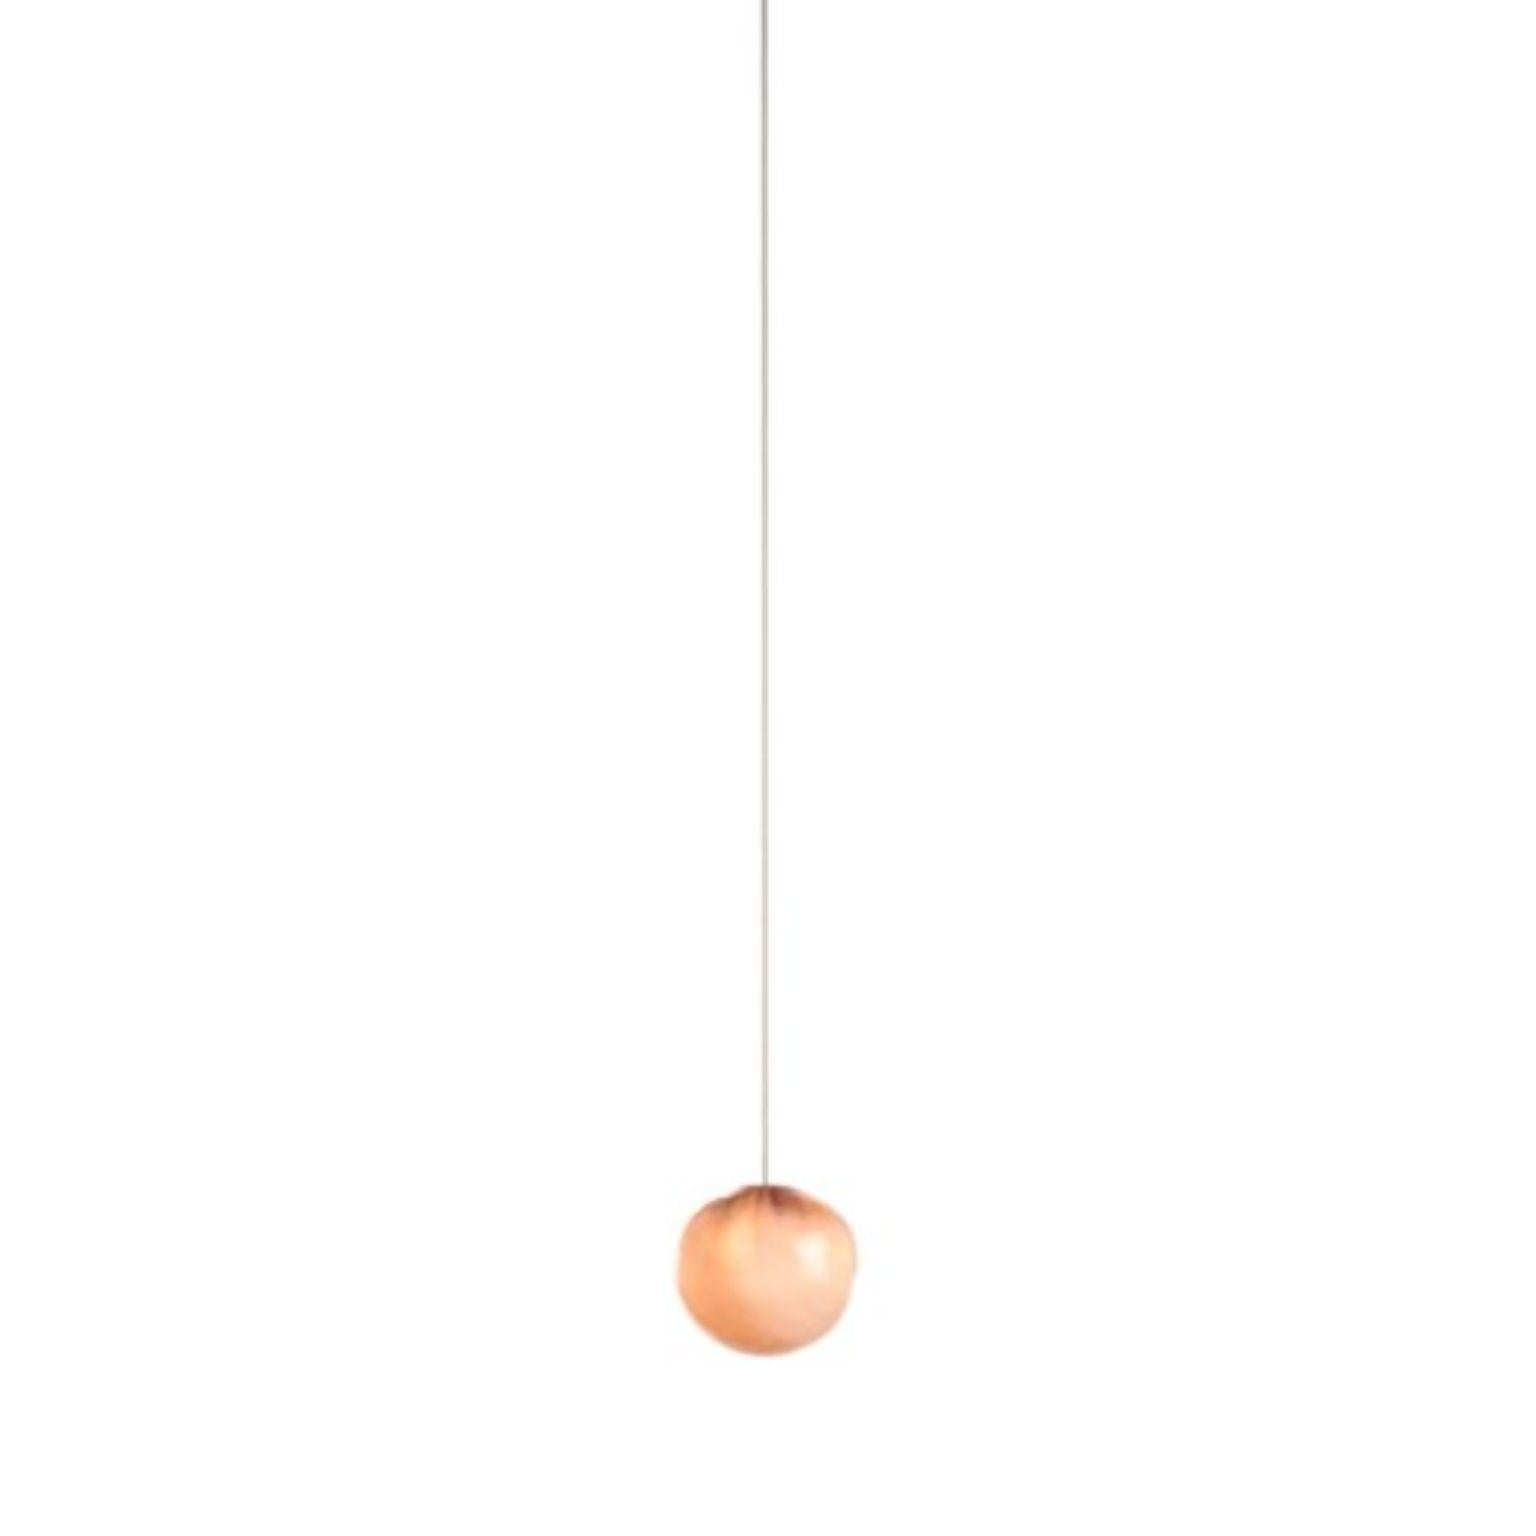 84.1 Pendant by Bocci
Dimensions: D11.6 x H300 cm
Materials: white powder coated square canopy
Weight: 2 kg
Also available in different dimensions.

All our lamps can be wired according to each country. If sold to the USA it will be wired for